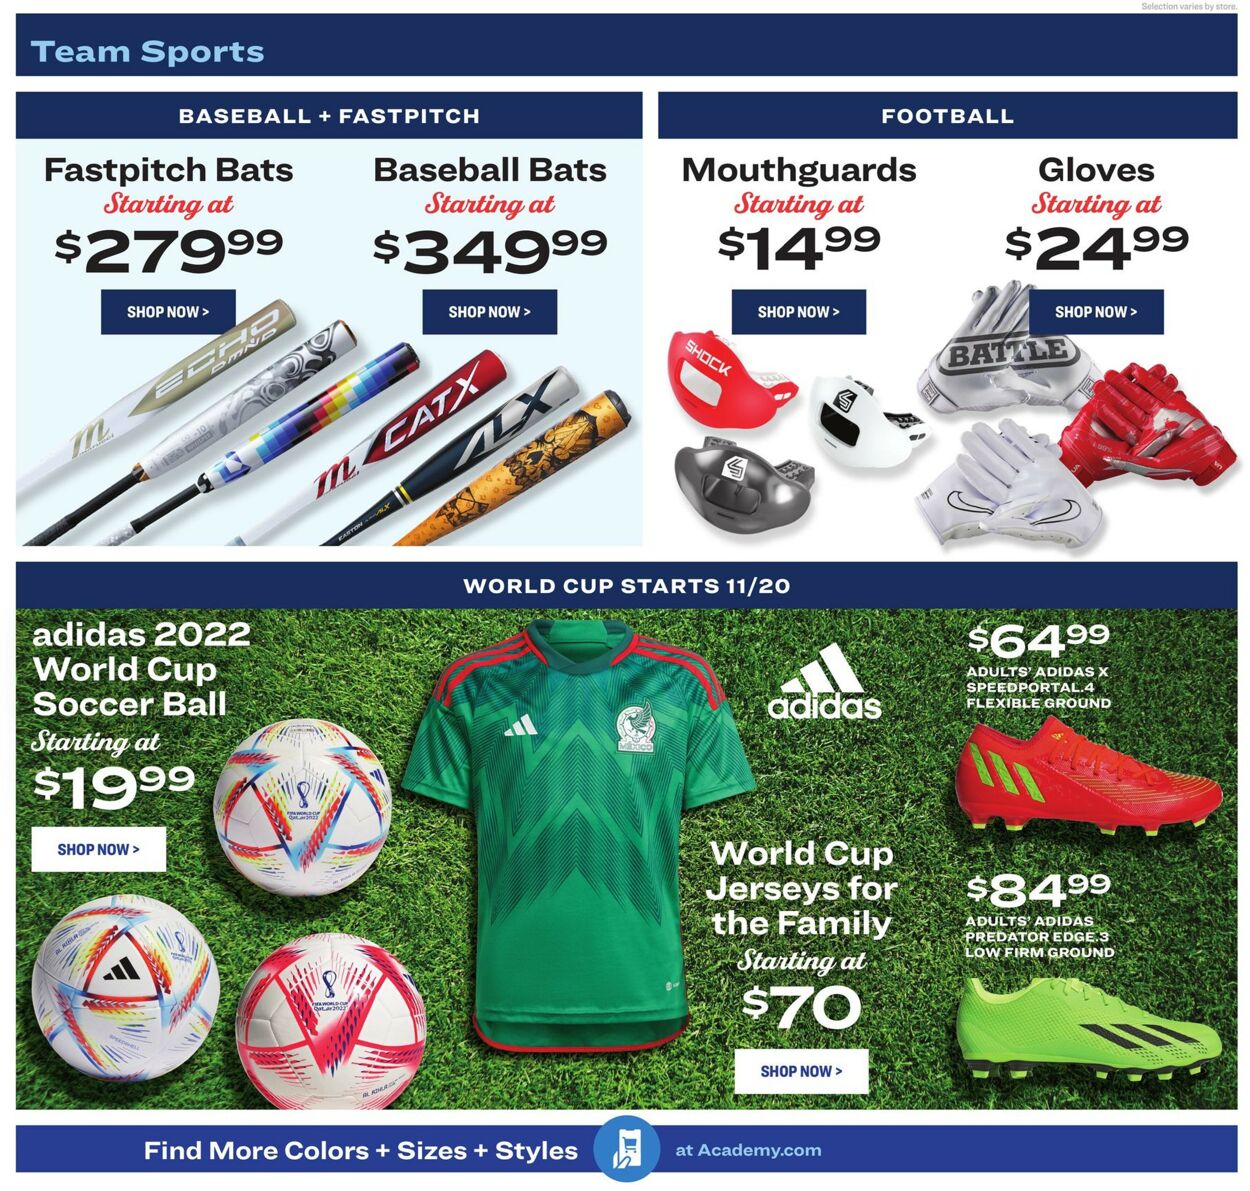 Academy Sports Ad from 10/24/2022